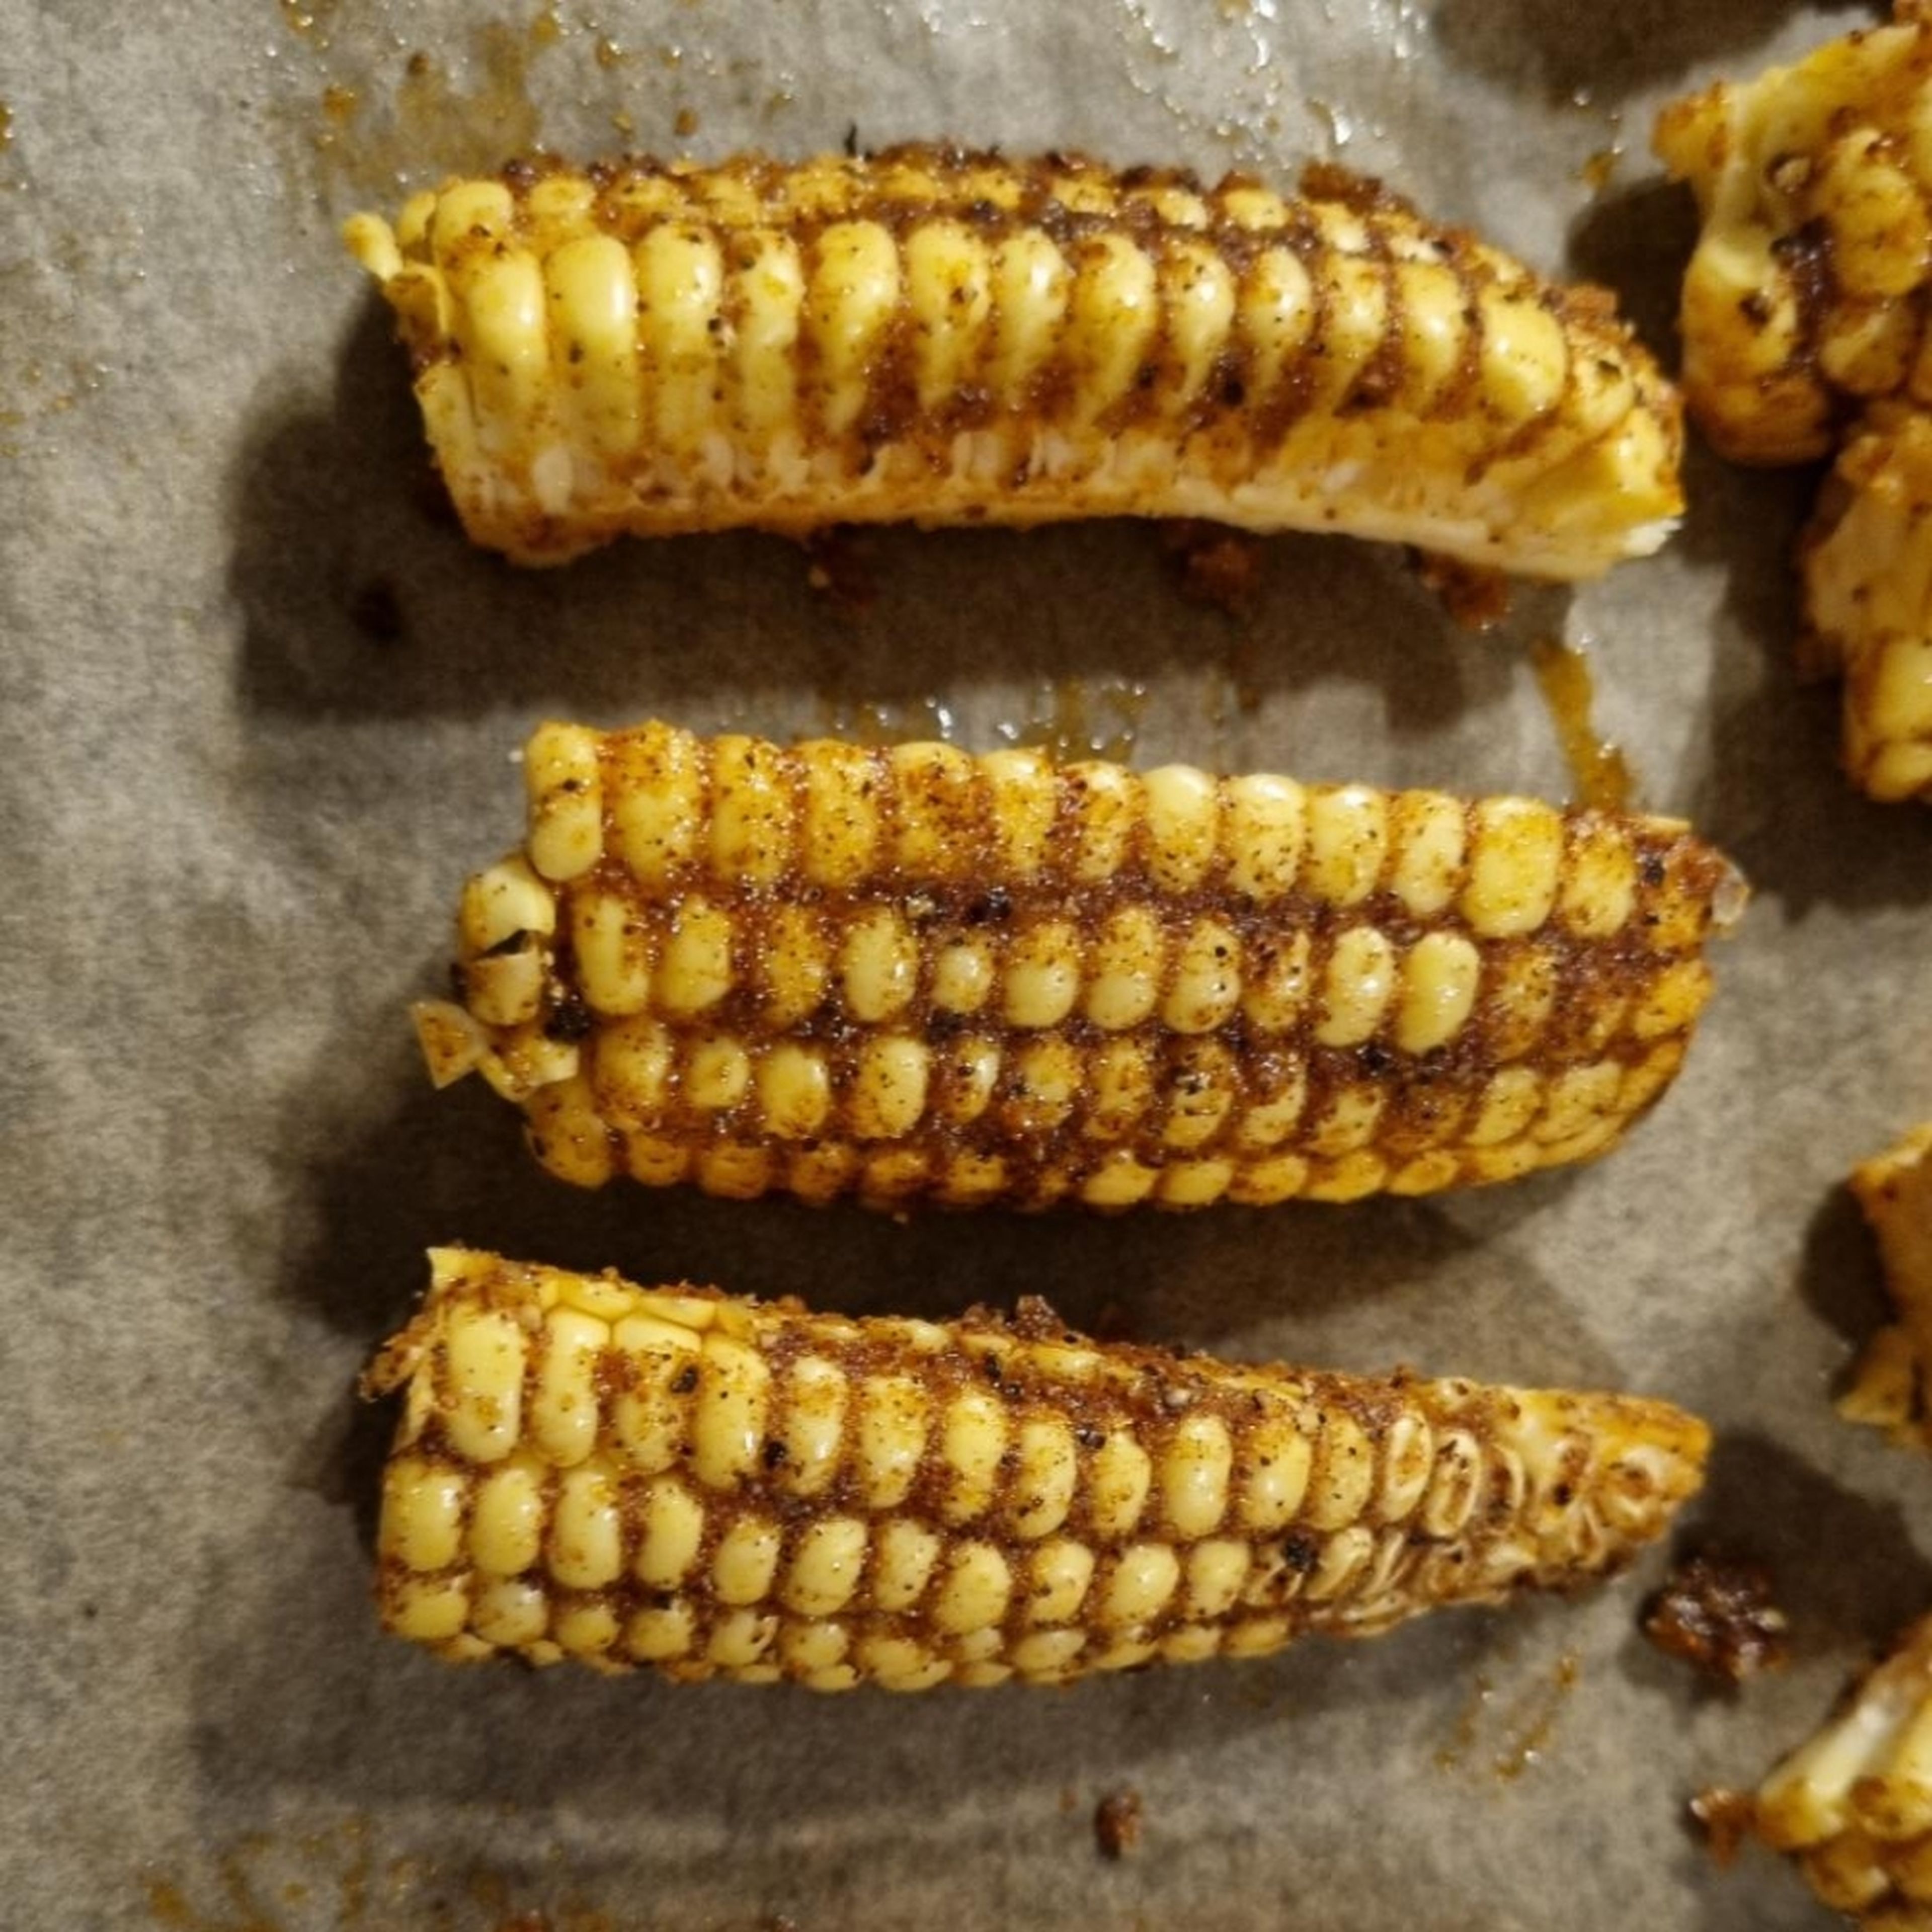 Rub the mix on to the corn riblets and place them on a baking tray lined with a baking paper. Put the tray into the pre-heated oven for 15 min. Check after 10 min to see if they are browning.